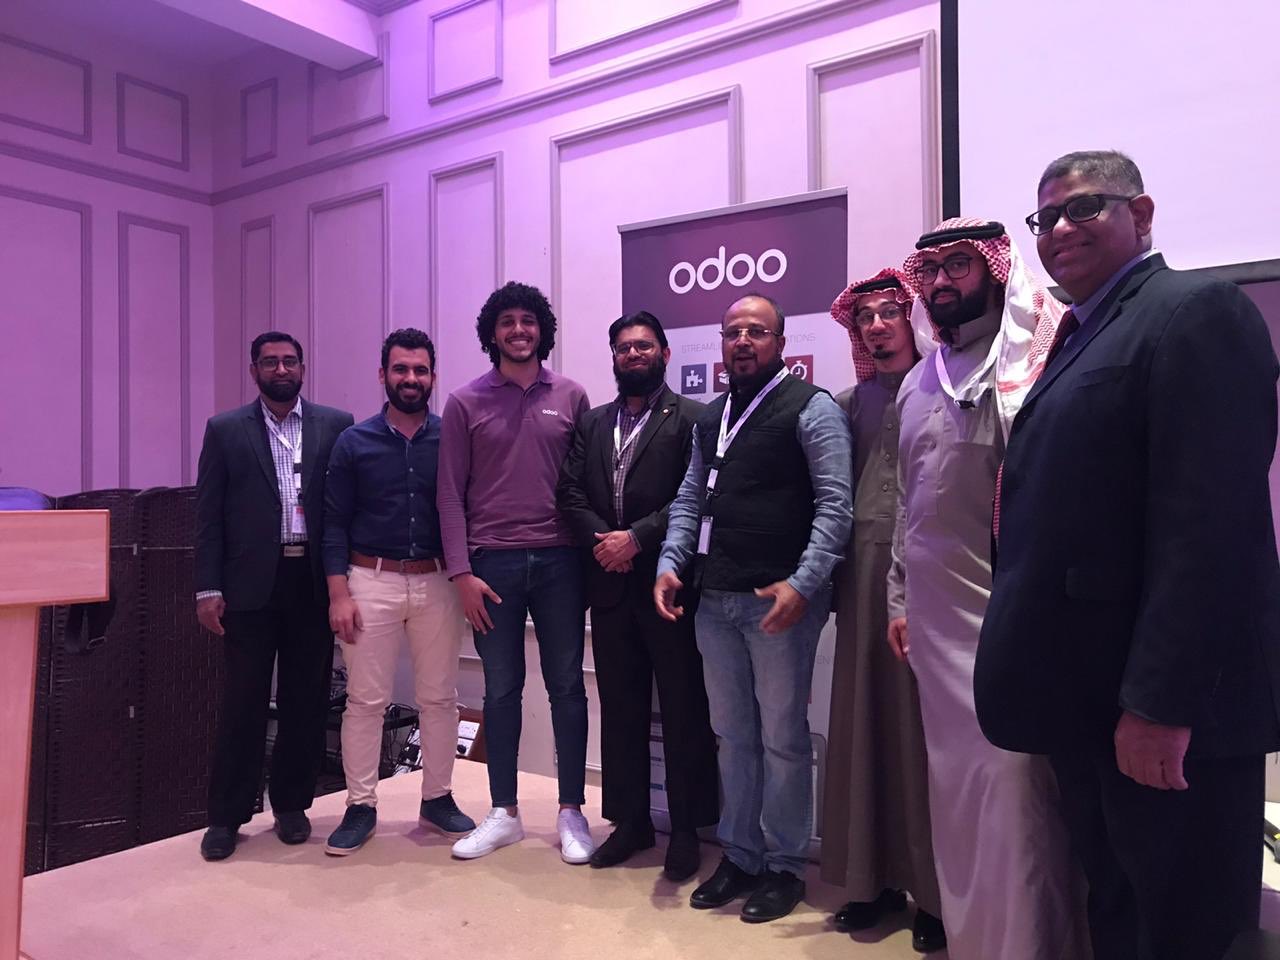 TeleNoc team meets with Odoo direct sales manager